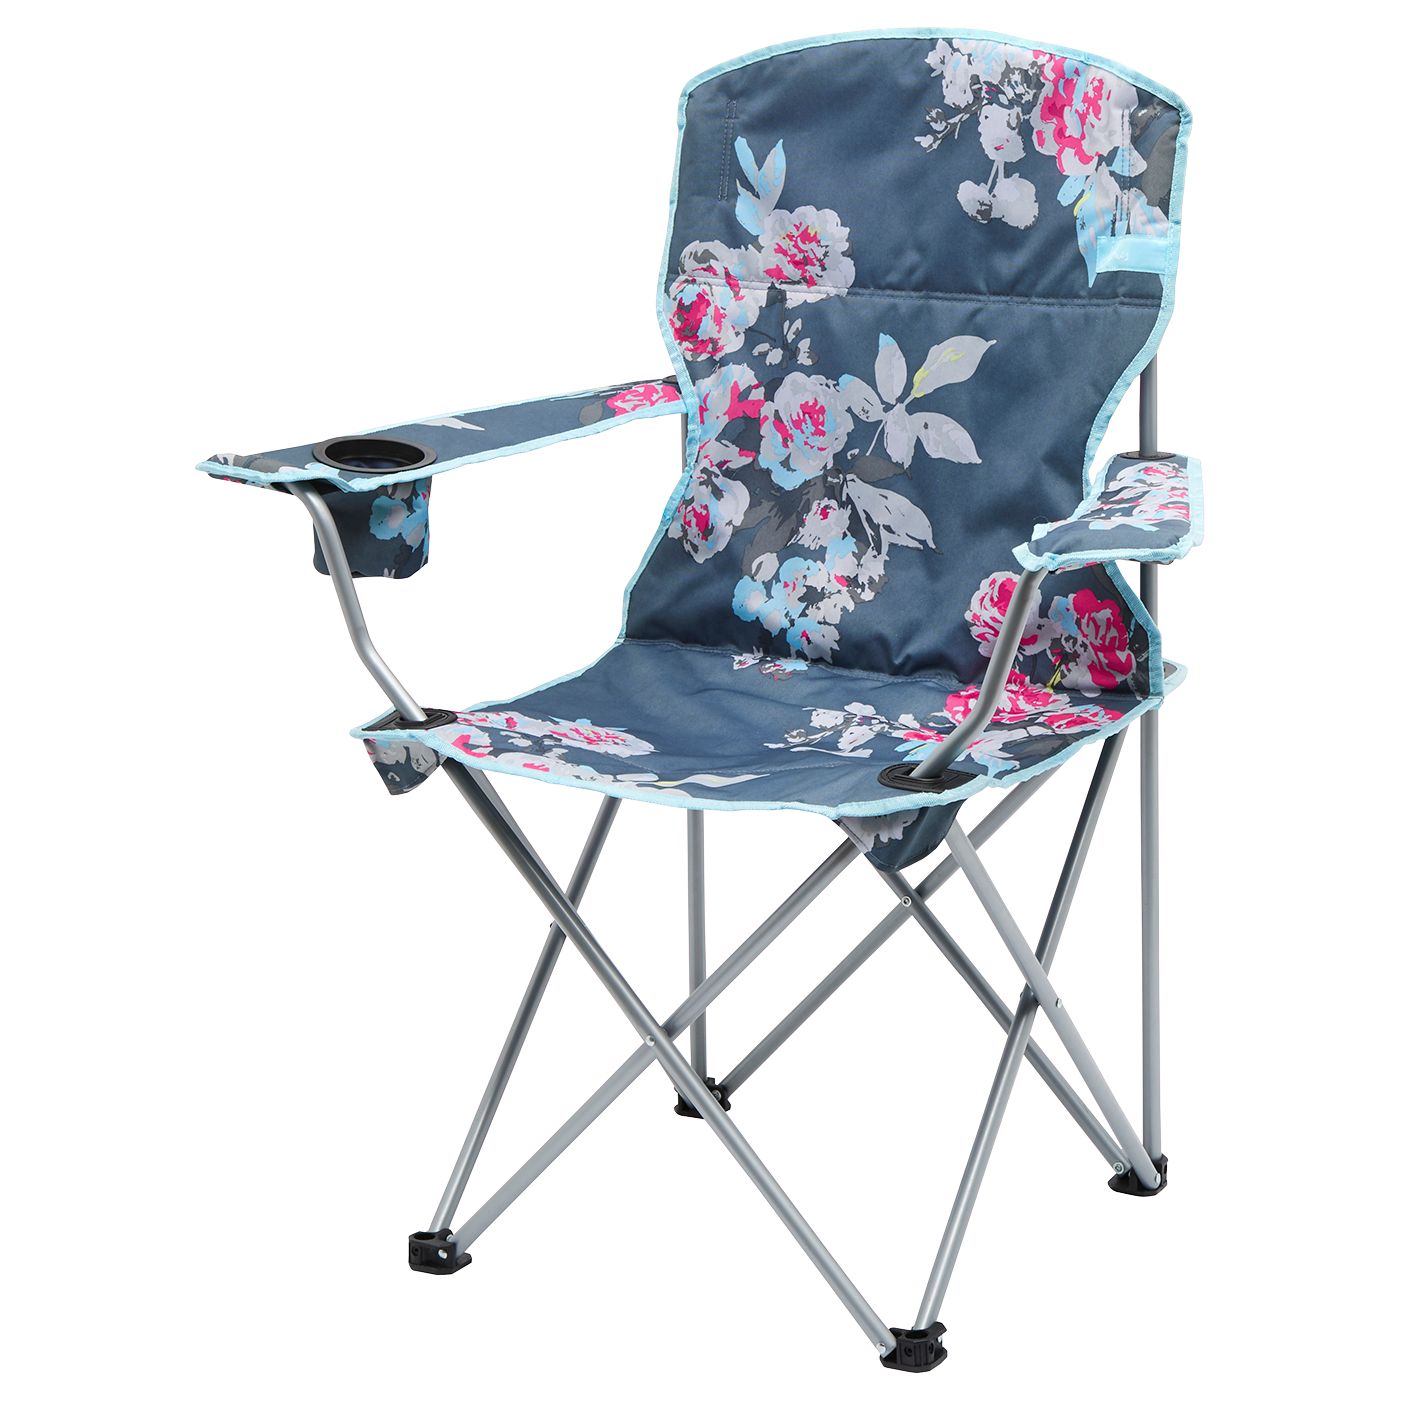 Joules Floral Picnic Chair, Grey at John Lewis & Partners